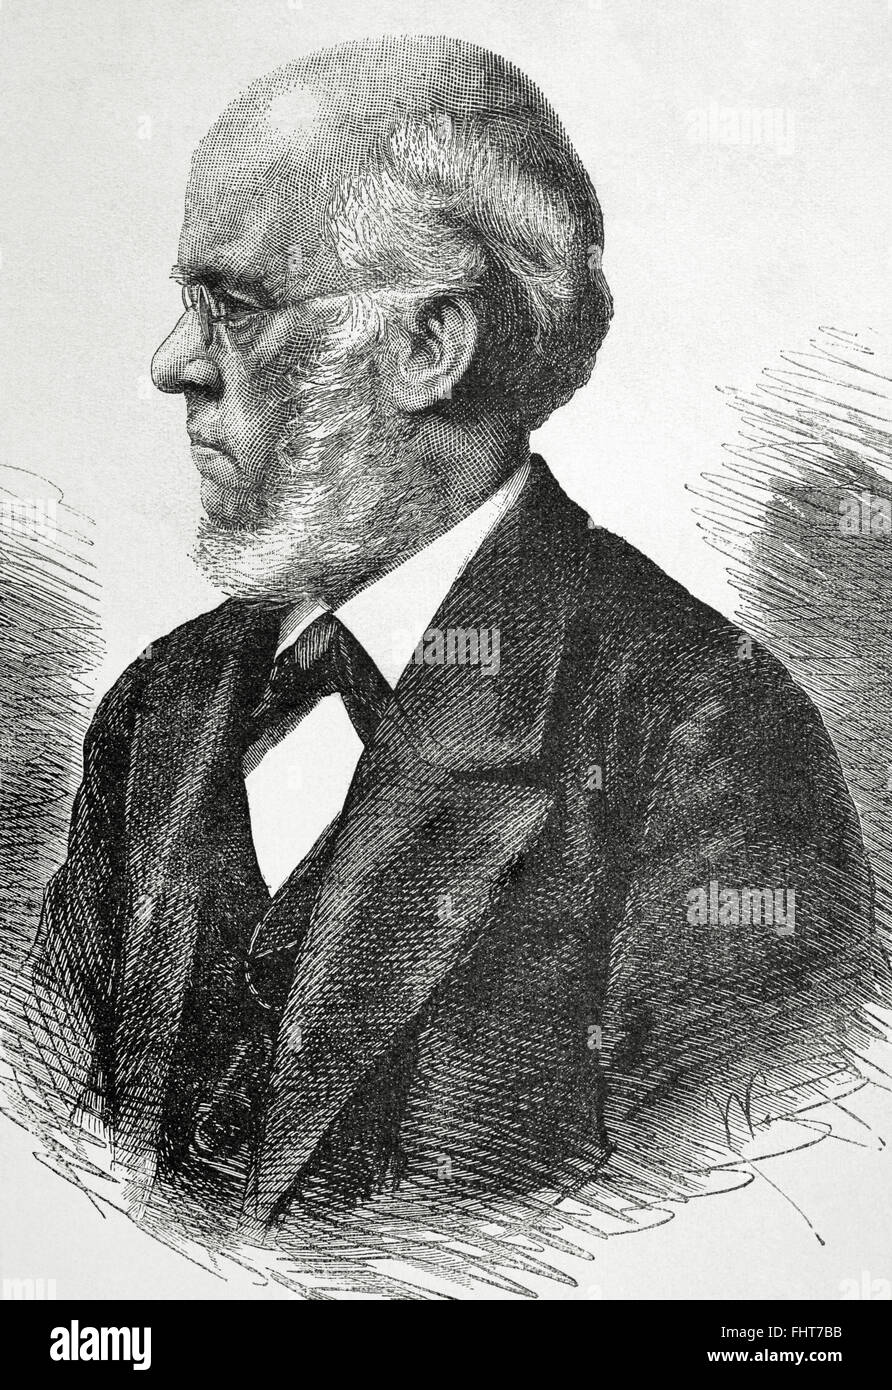 Adolph von Menzel (1815-1905). German Artist for drawings, etching and paintings. Portrait. Engraving by La Ilustración Artistica, 1885. Stock Photo